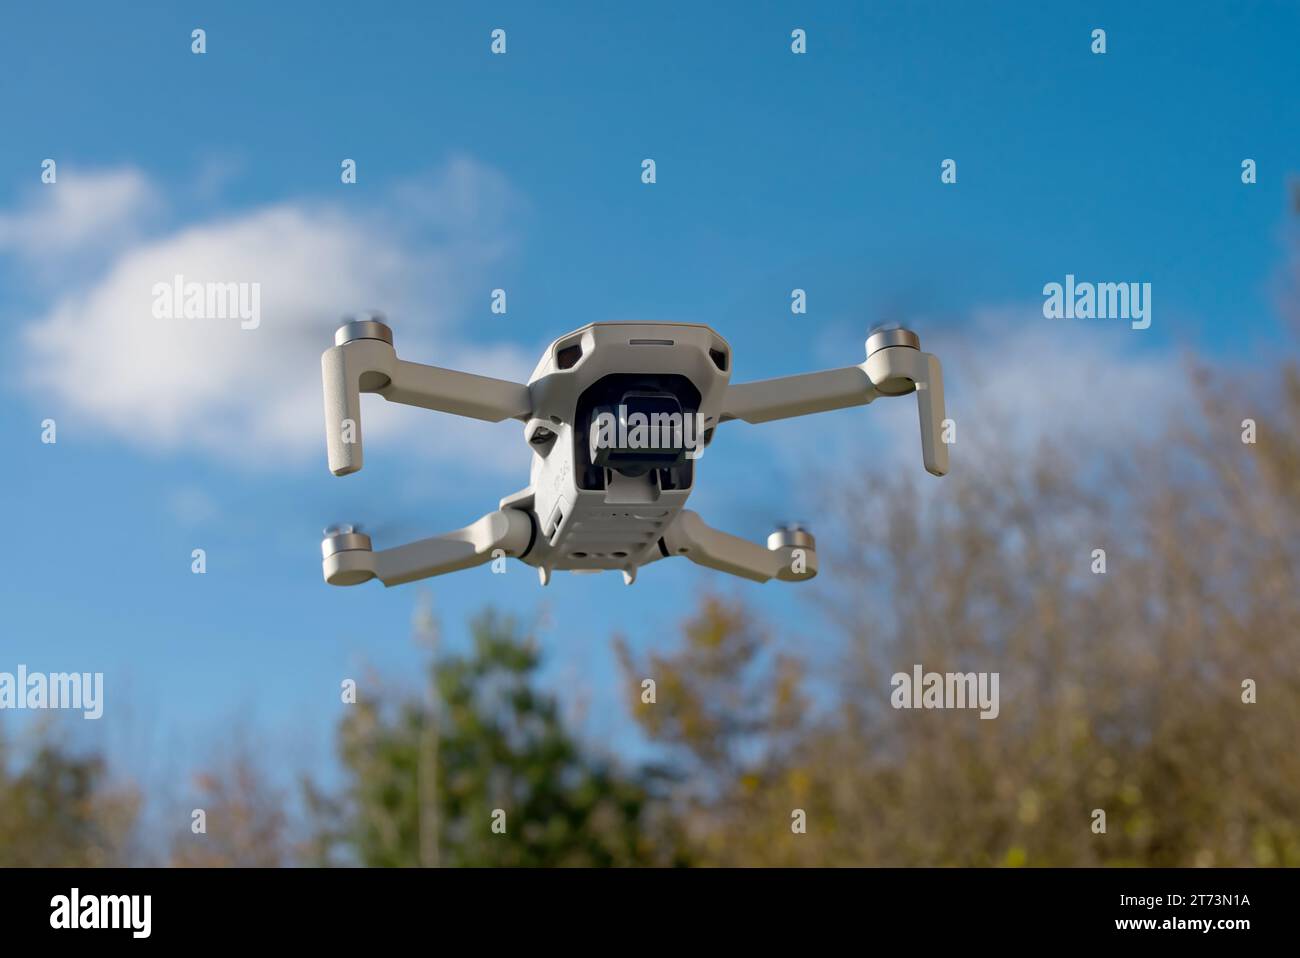 A drone hovering in front of autumn trees that deliver nice bokeh. An ND Filter is attached to the drone. Stock Photo